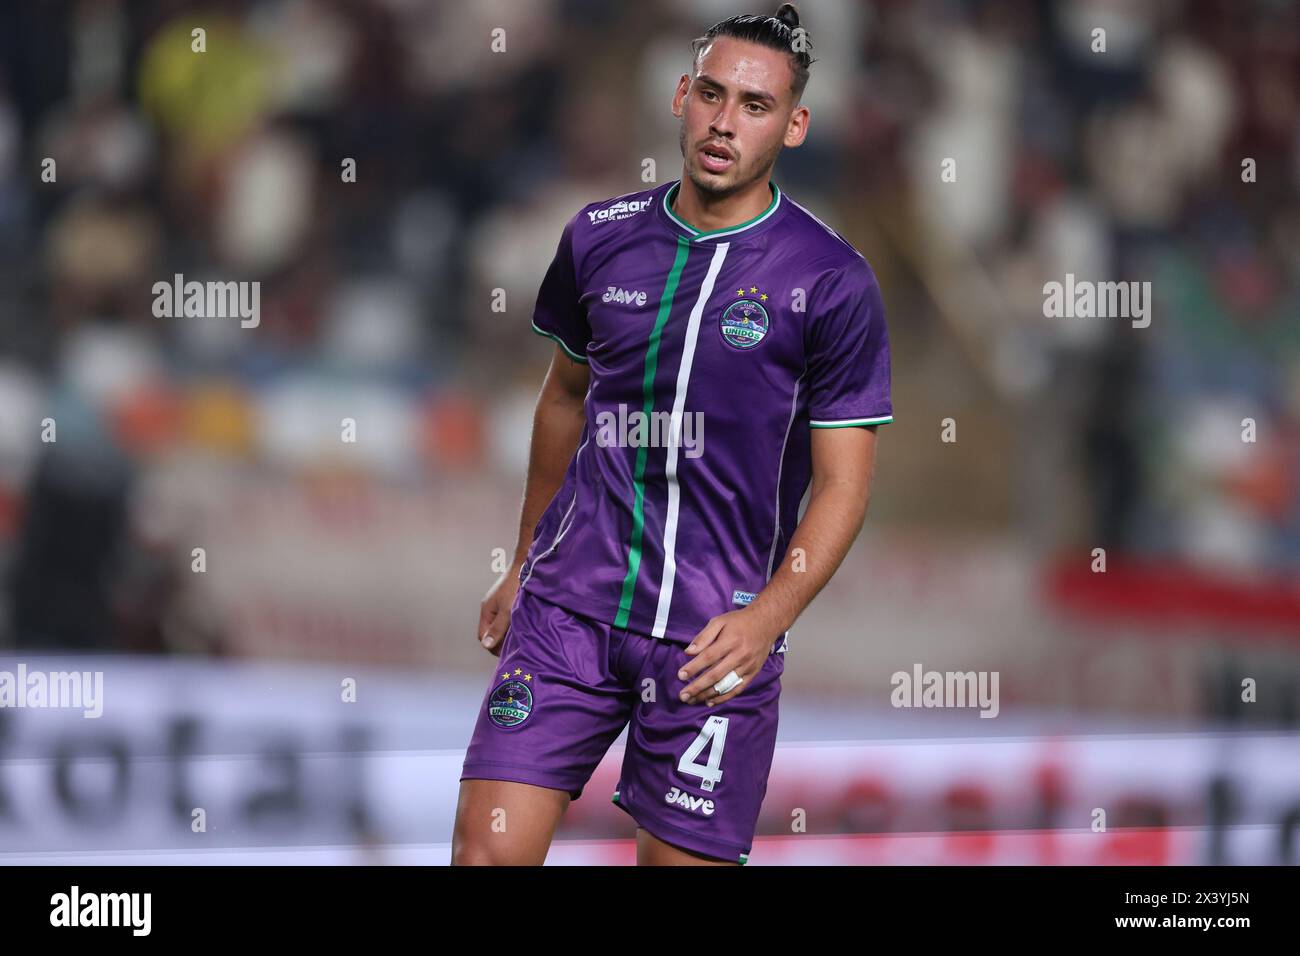 Lima, Peru. 29th Apr, 2024. Erick Noriega of Comerciantes Unidosduring the Torneo Apertura Liga 1 Apuesta Total 2024 match, date 13 between Universitario de Deportes and Comerciantes Unidos played at Monumental Stadium on April 29, 2024 in Lima, Peru. (Photo by Miguel Marruffo/PRESSINPHOTO) Credit: PRESSINPHOTO SPORTS AGENCY/Alamy Live News Stock Photo